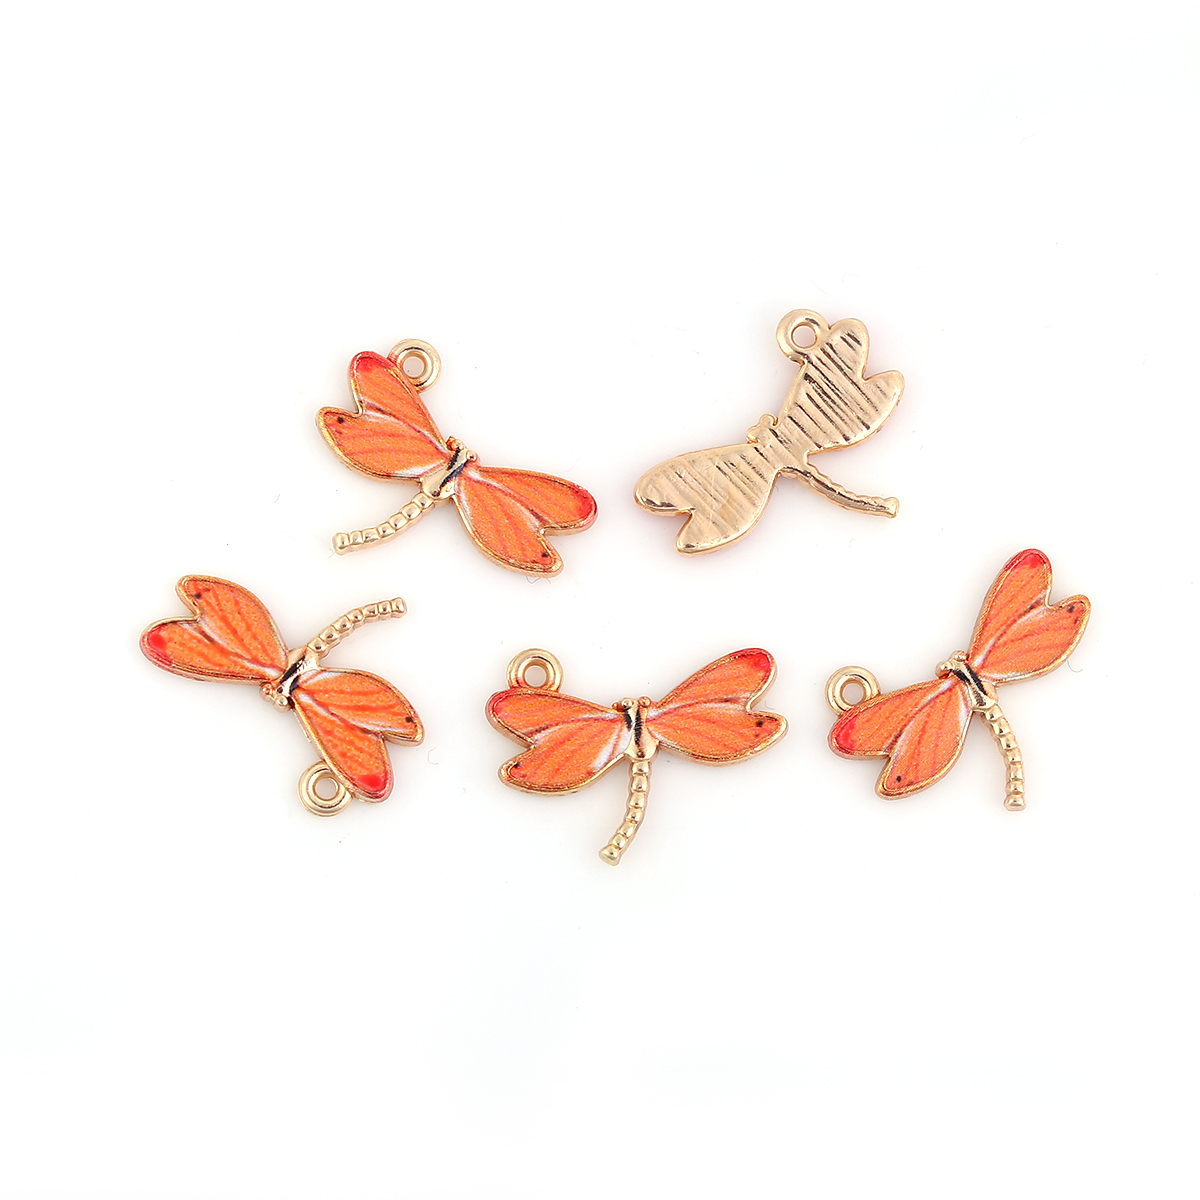 Picture of Zinc Based Alloy Charms Dragonfly Animal Gold Plated Orange Enamel 22mm( 7/8") x 17mm( 5/8"), 10 PCs